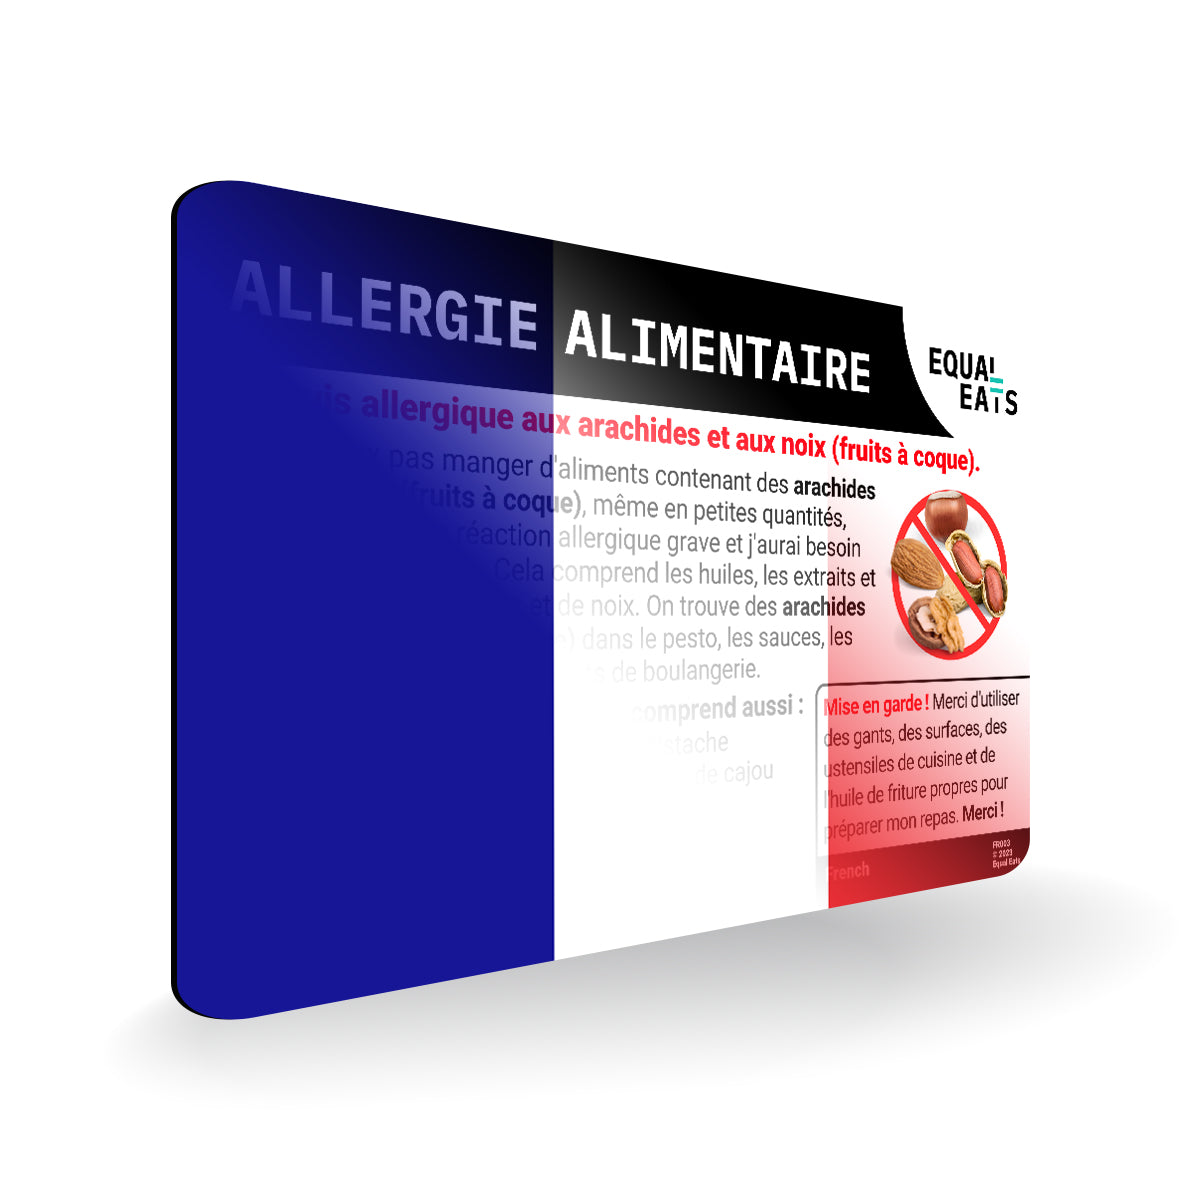 French Peanut and Tree Allergy Card, nut allergies in French